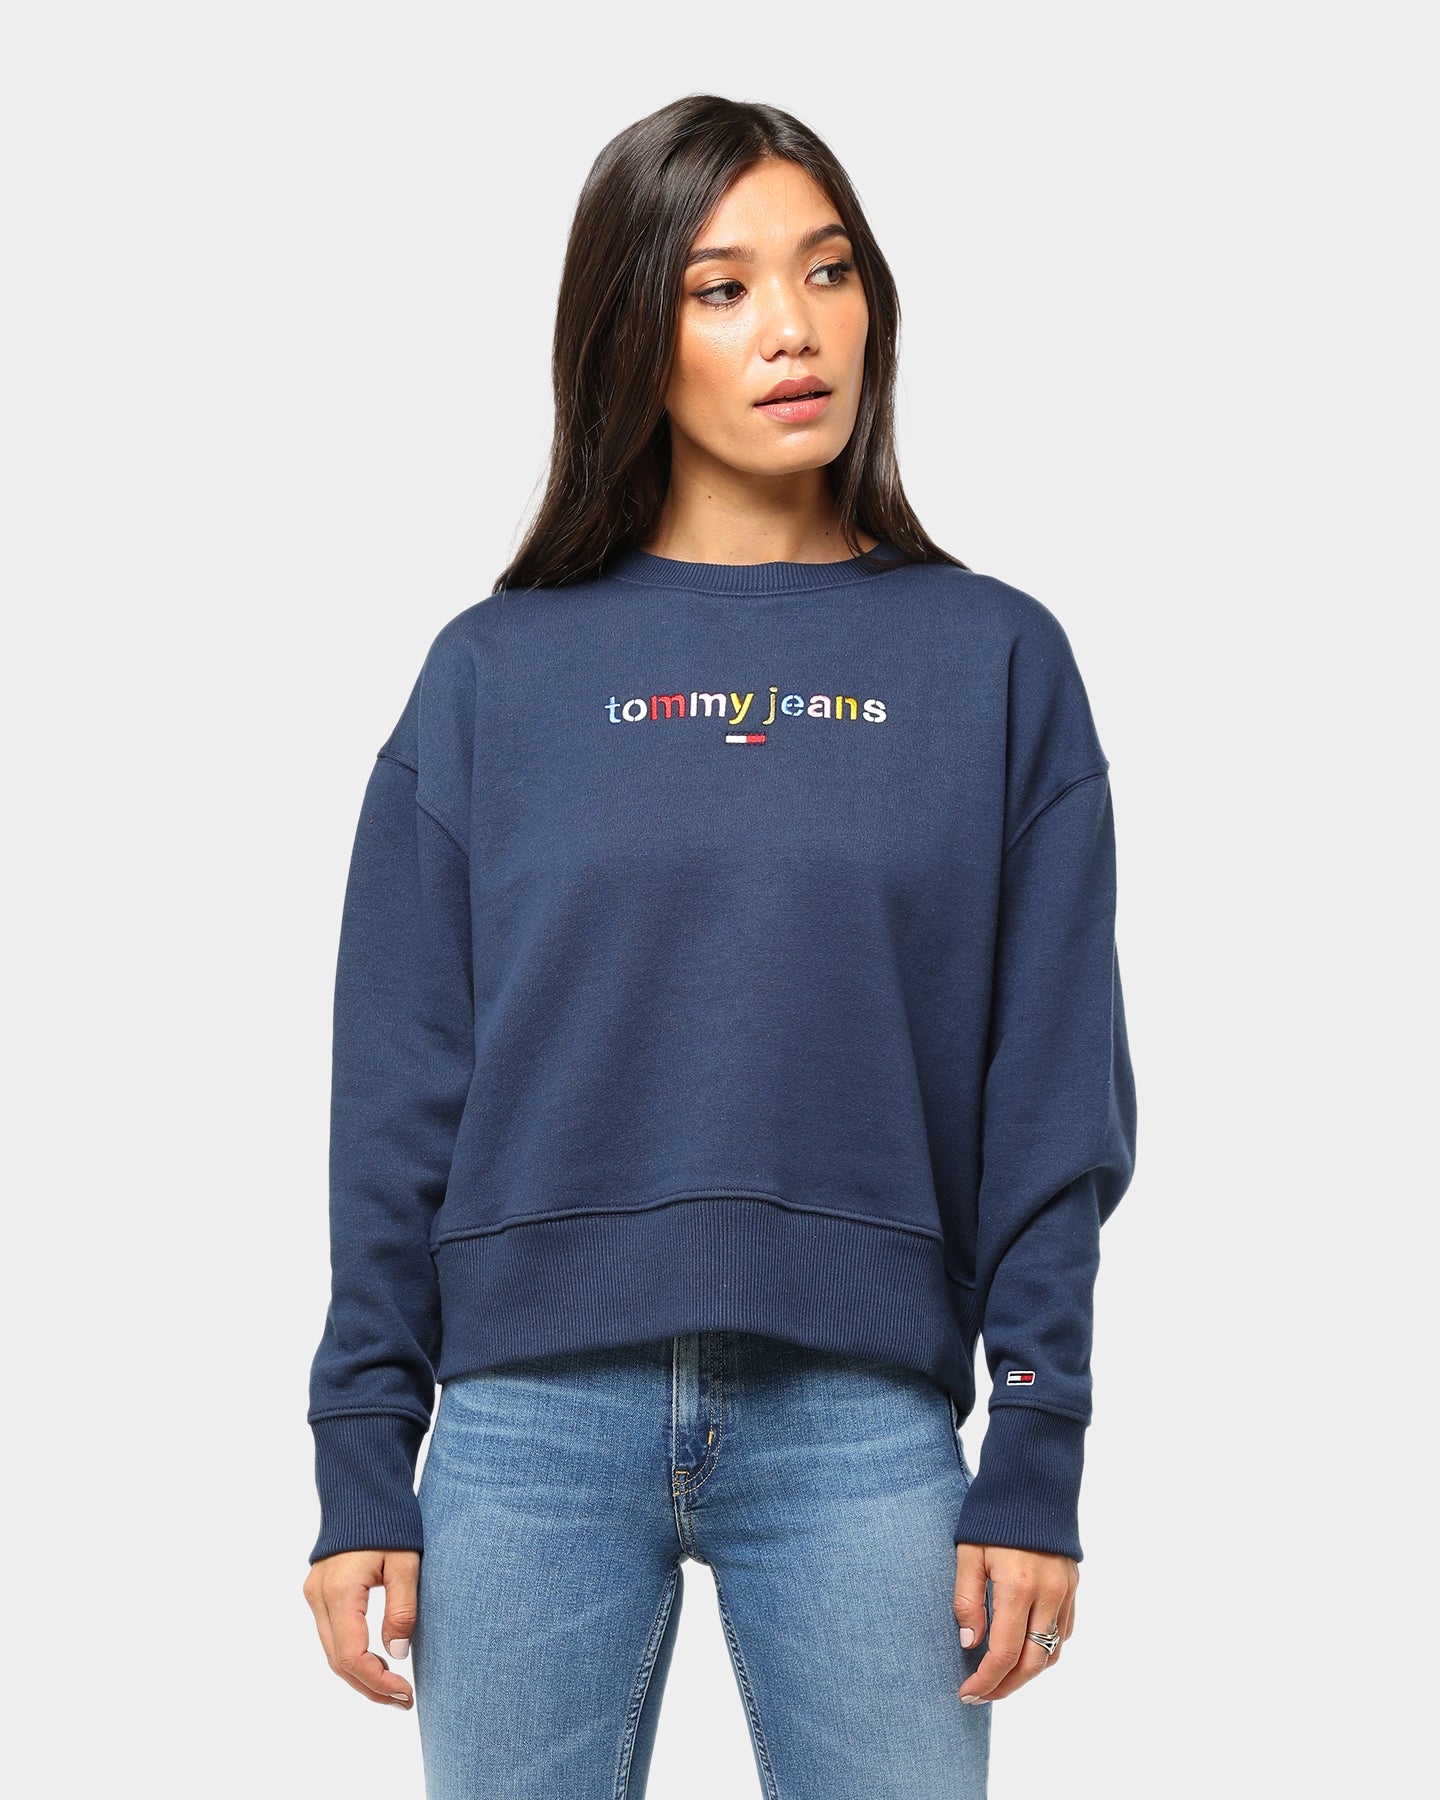 tommy jeans grey sweater